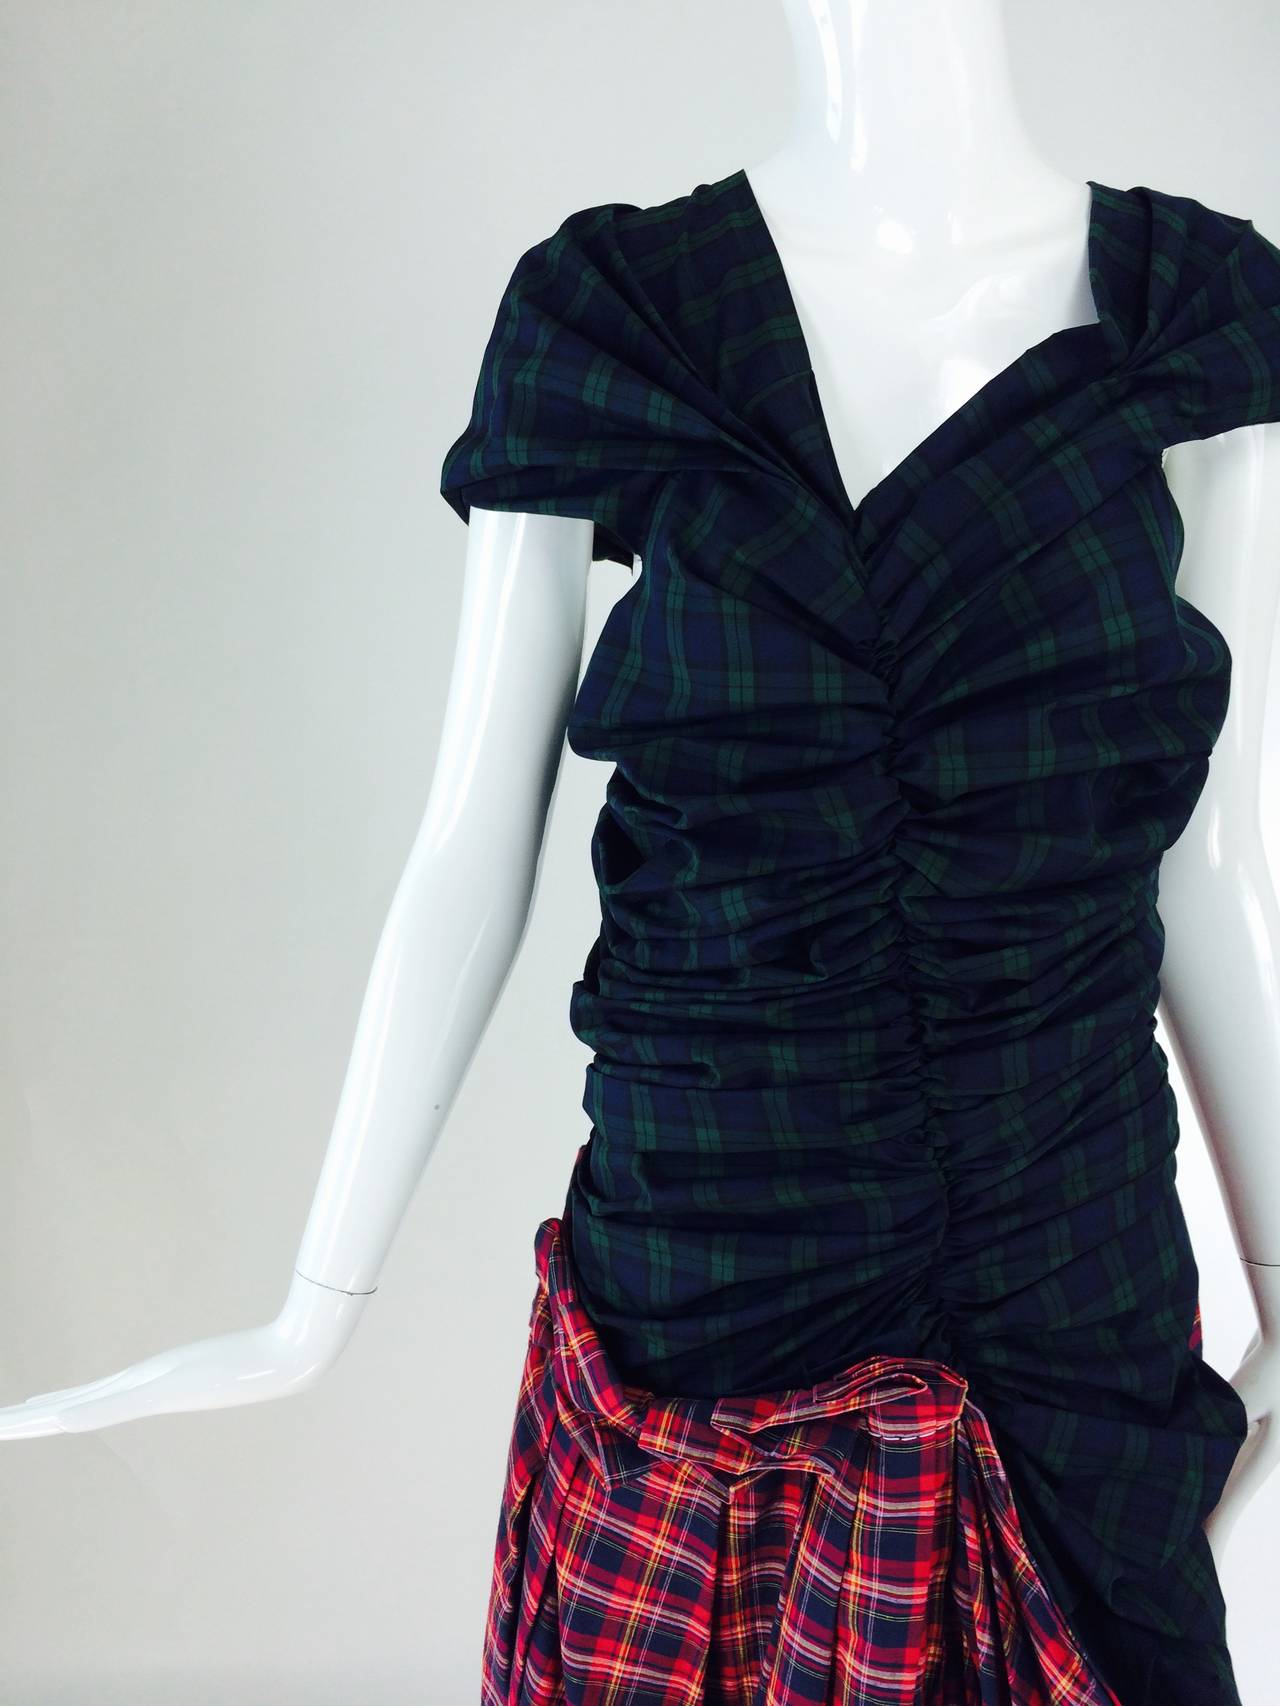 Comme des Garcons tartan/plaid dress in green & red 2005..Short sleeve dress with a shirred bodice of green tartan/plaid...Attached asymmetrical draped skirt of red tartan/plaid...The dress is unlined and closes at the back with an exposed silver